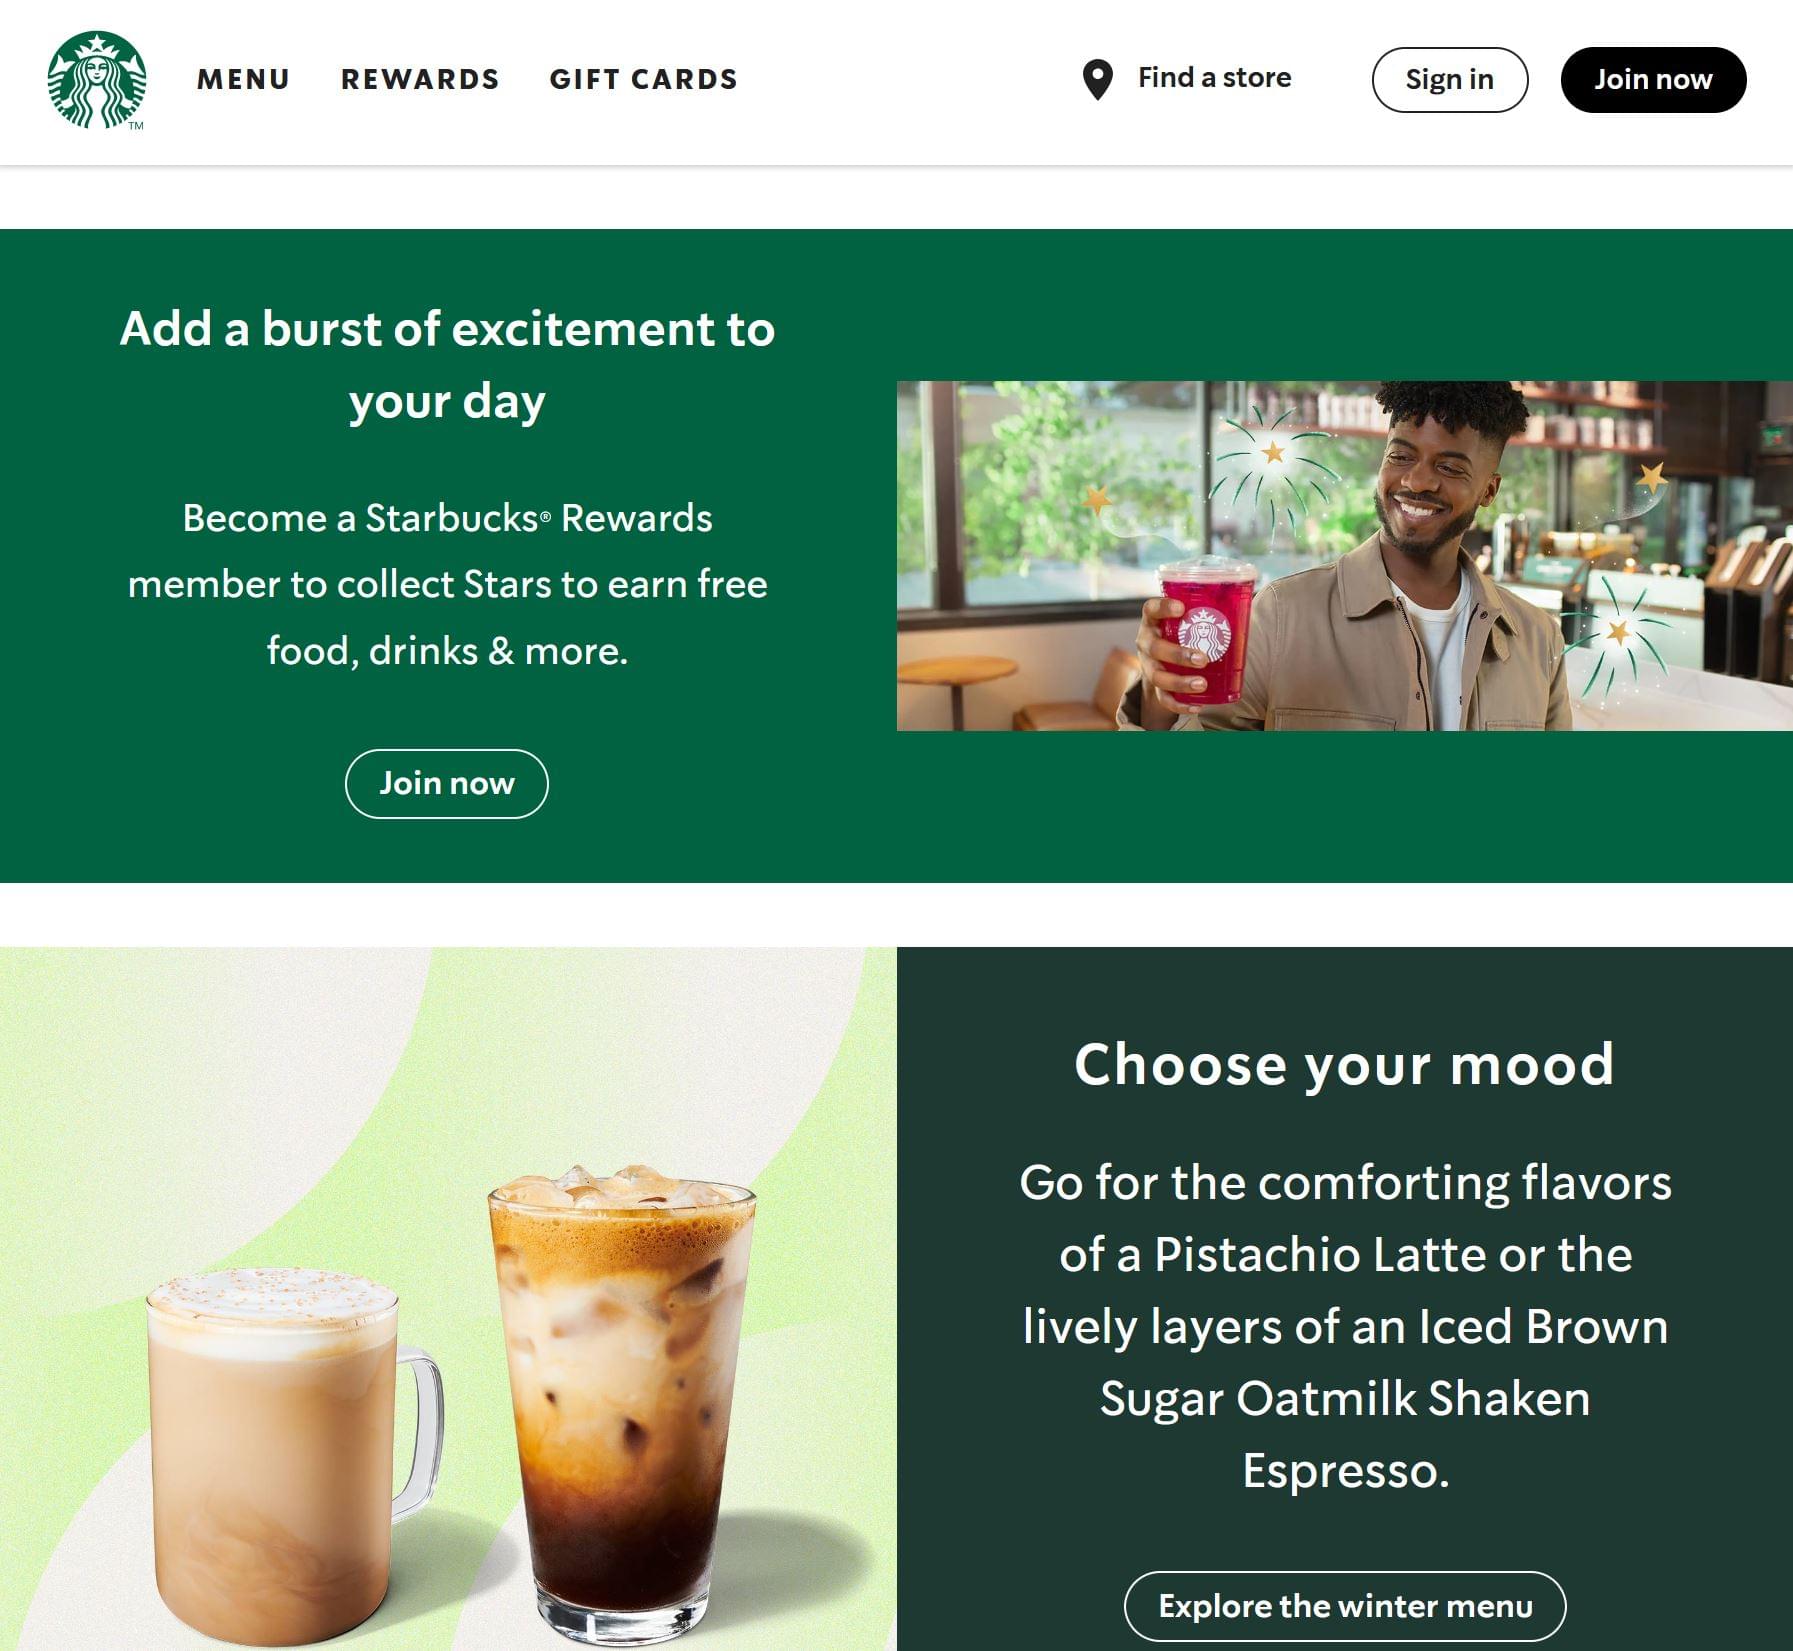 The Starbucks website landing page from today